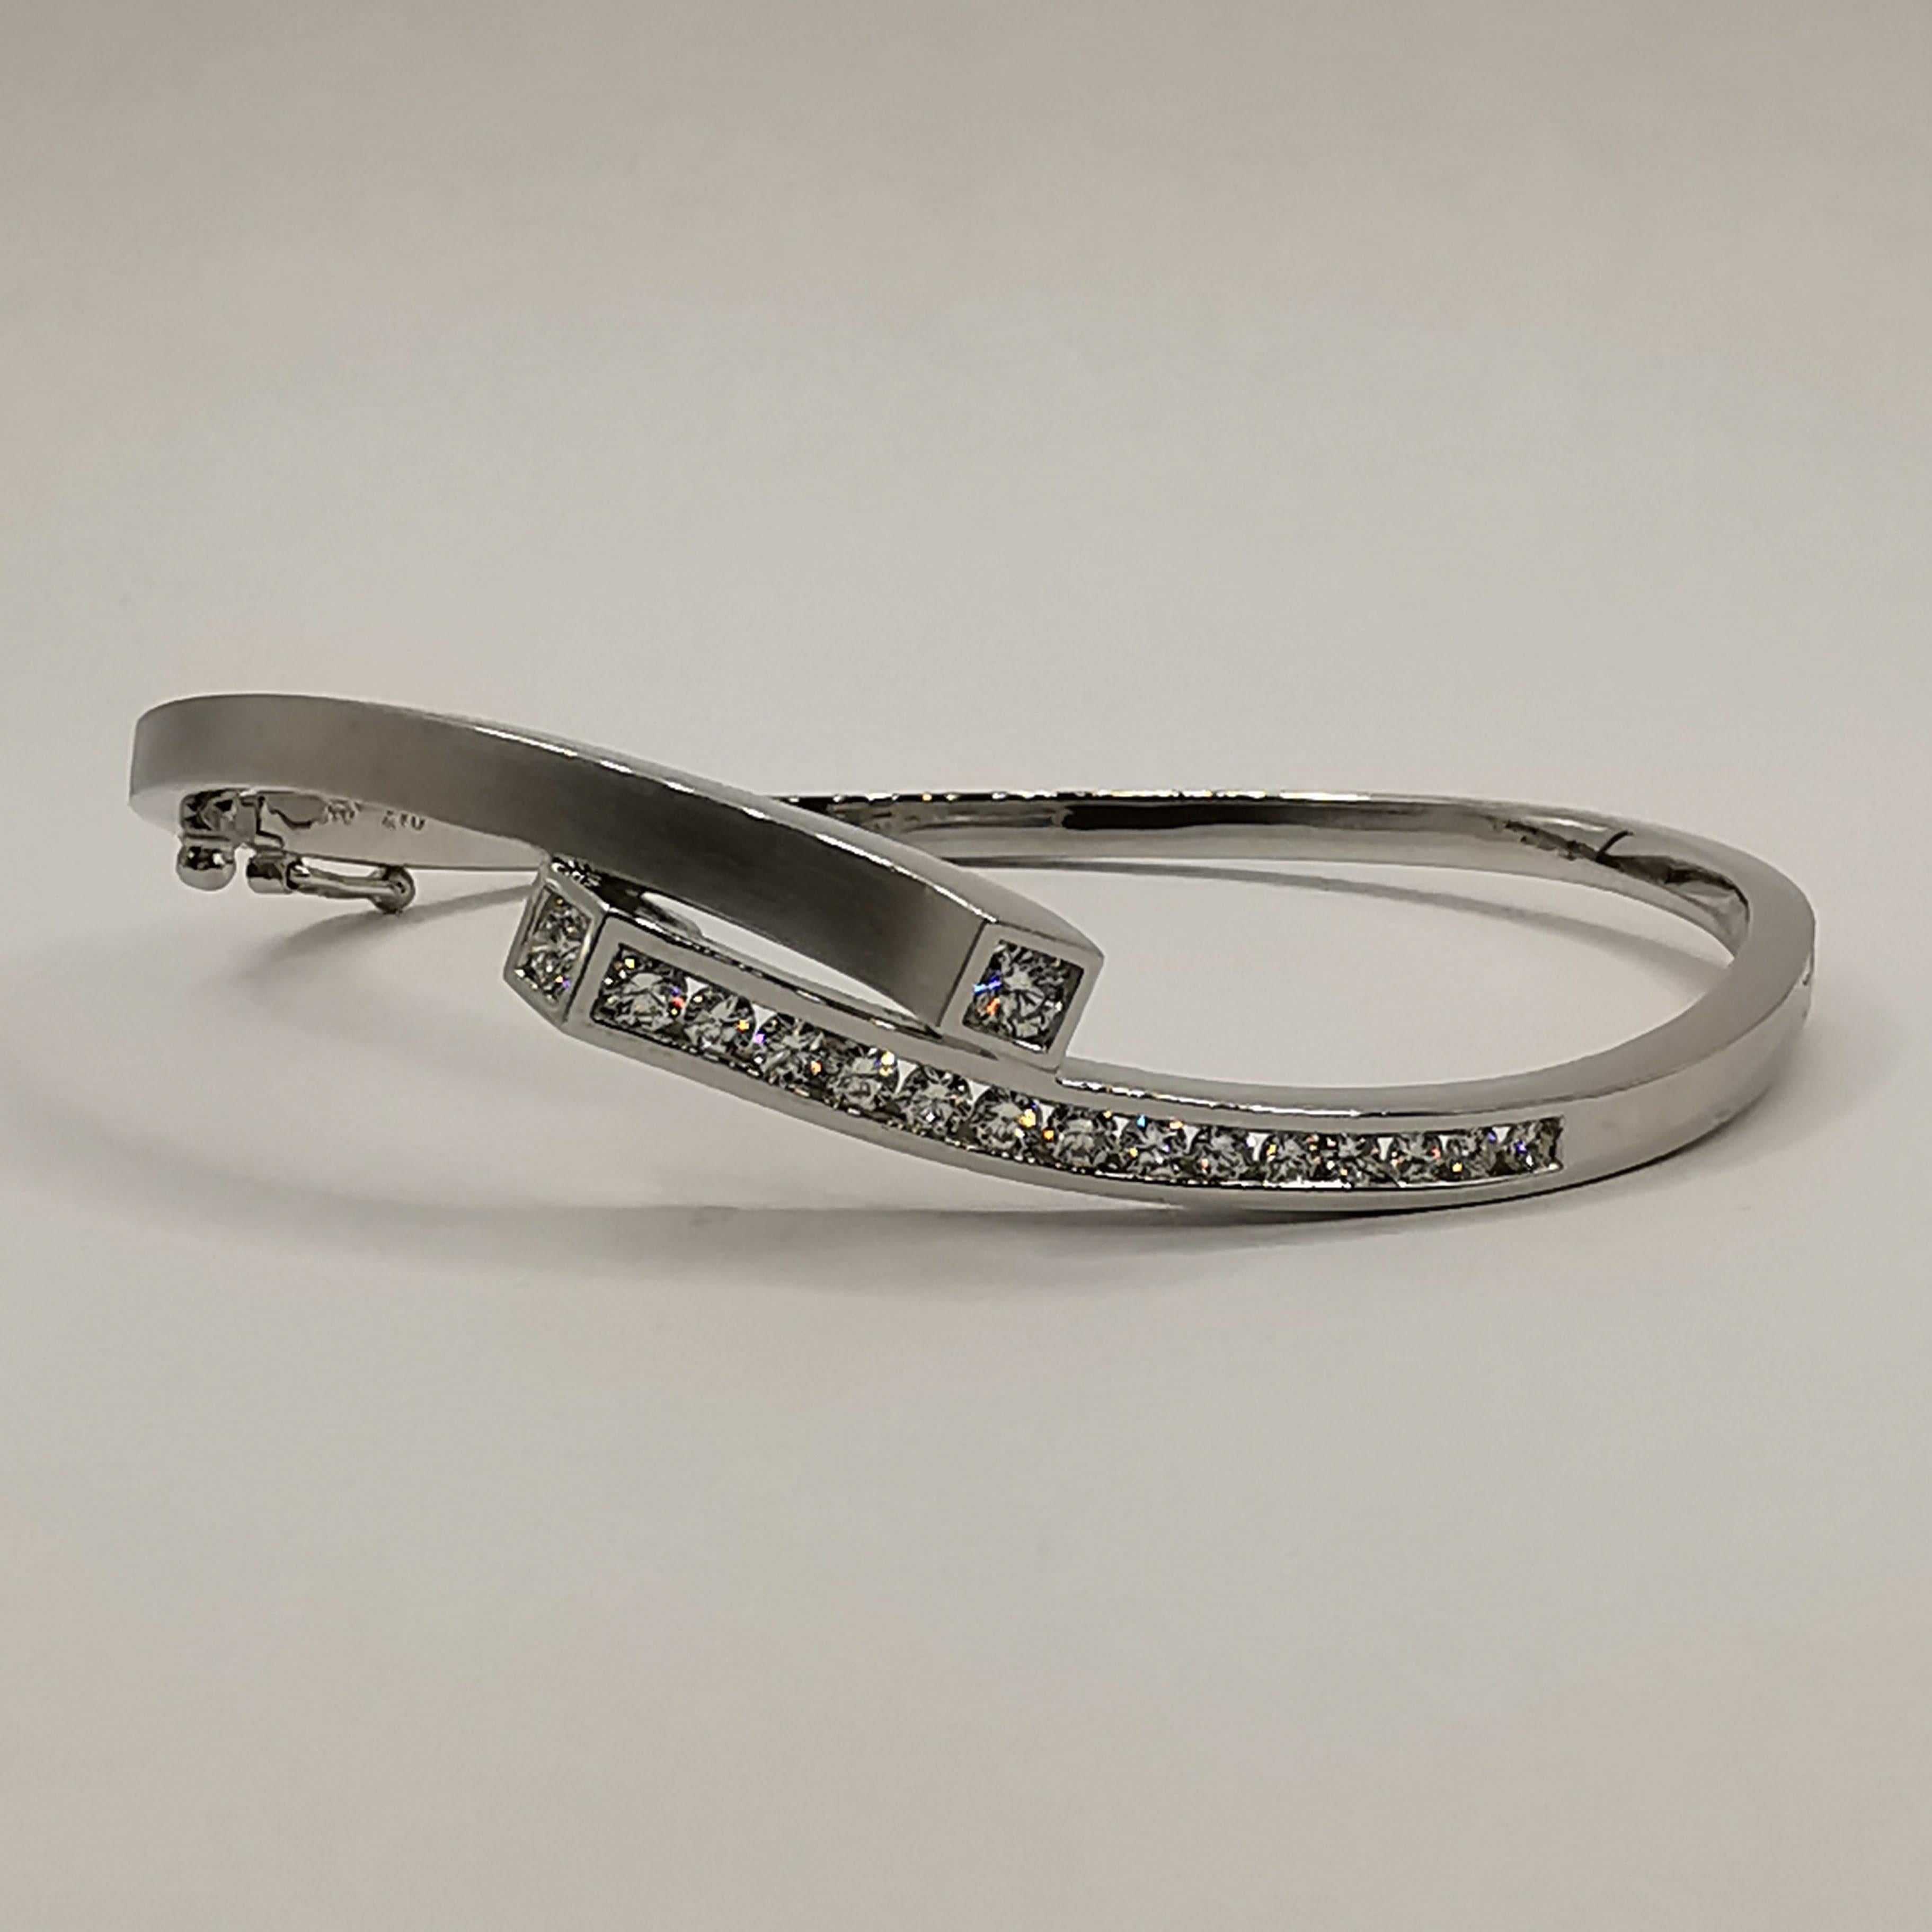 This luxurious diamond cuff bracelet is a true statement piece that will add a touch of glamour and sophistication to any outfit. Crafted from 18k white gold, the bracelet features a sleek and elegant design that is sure to turn heads. The bracelet